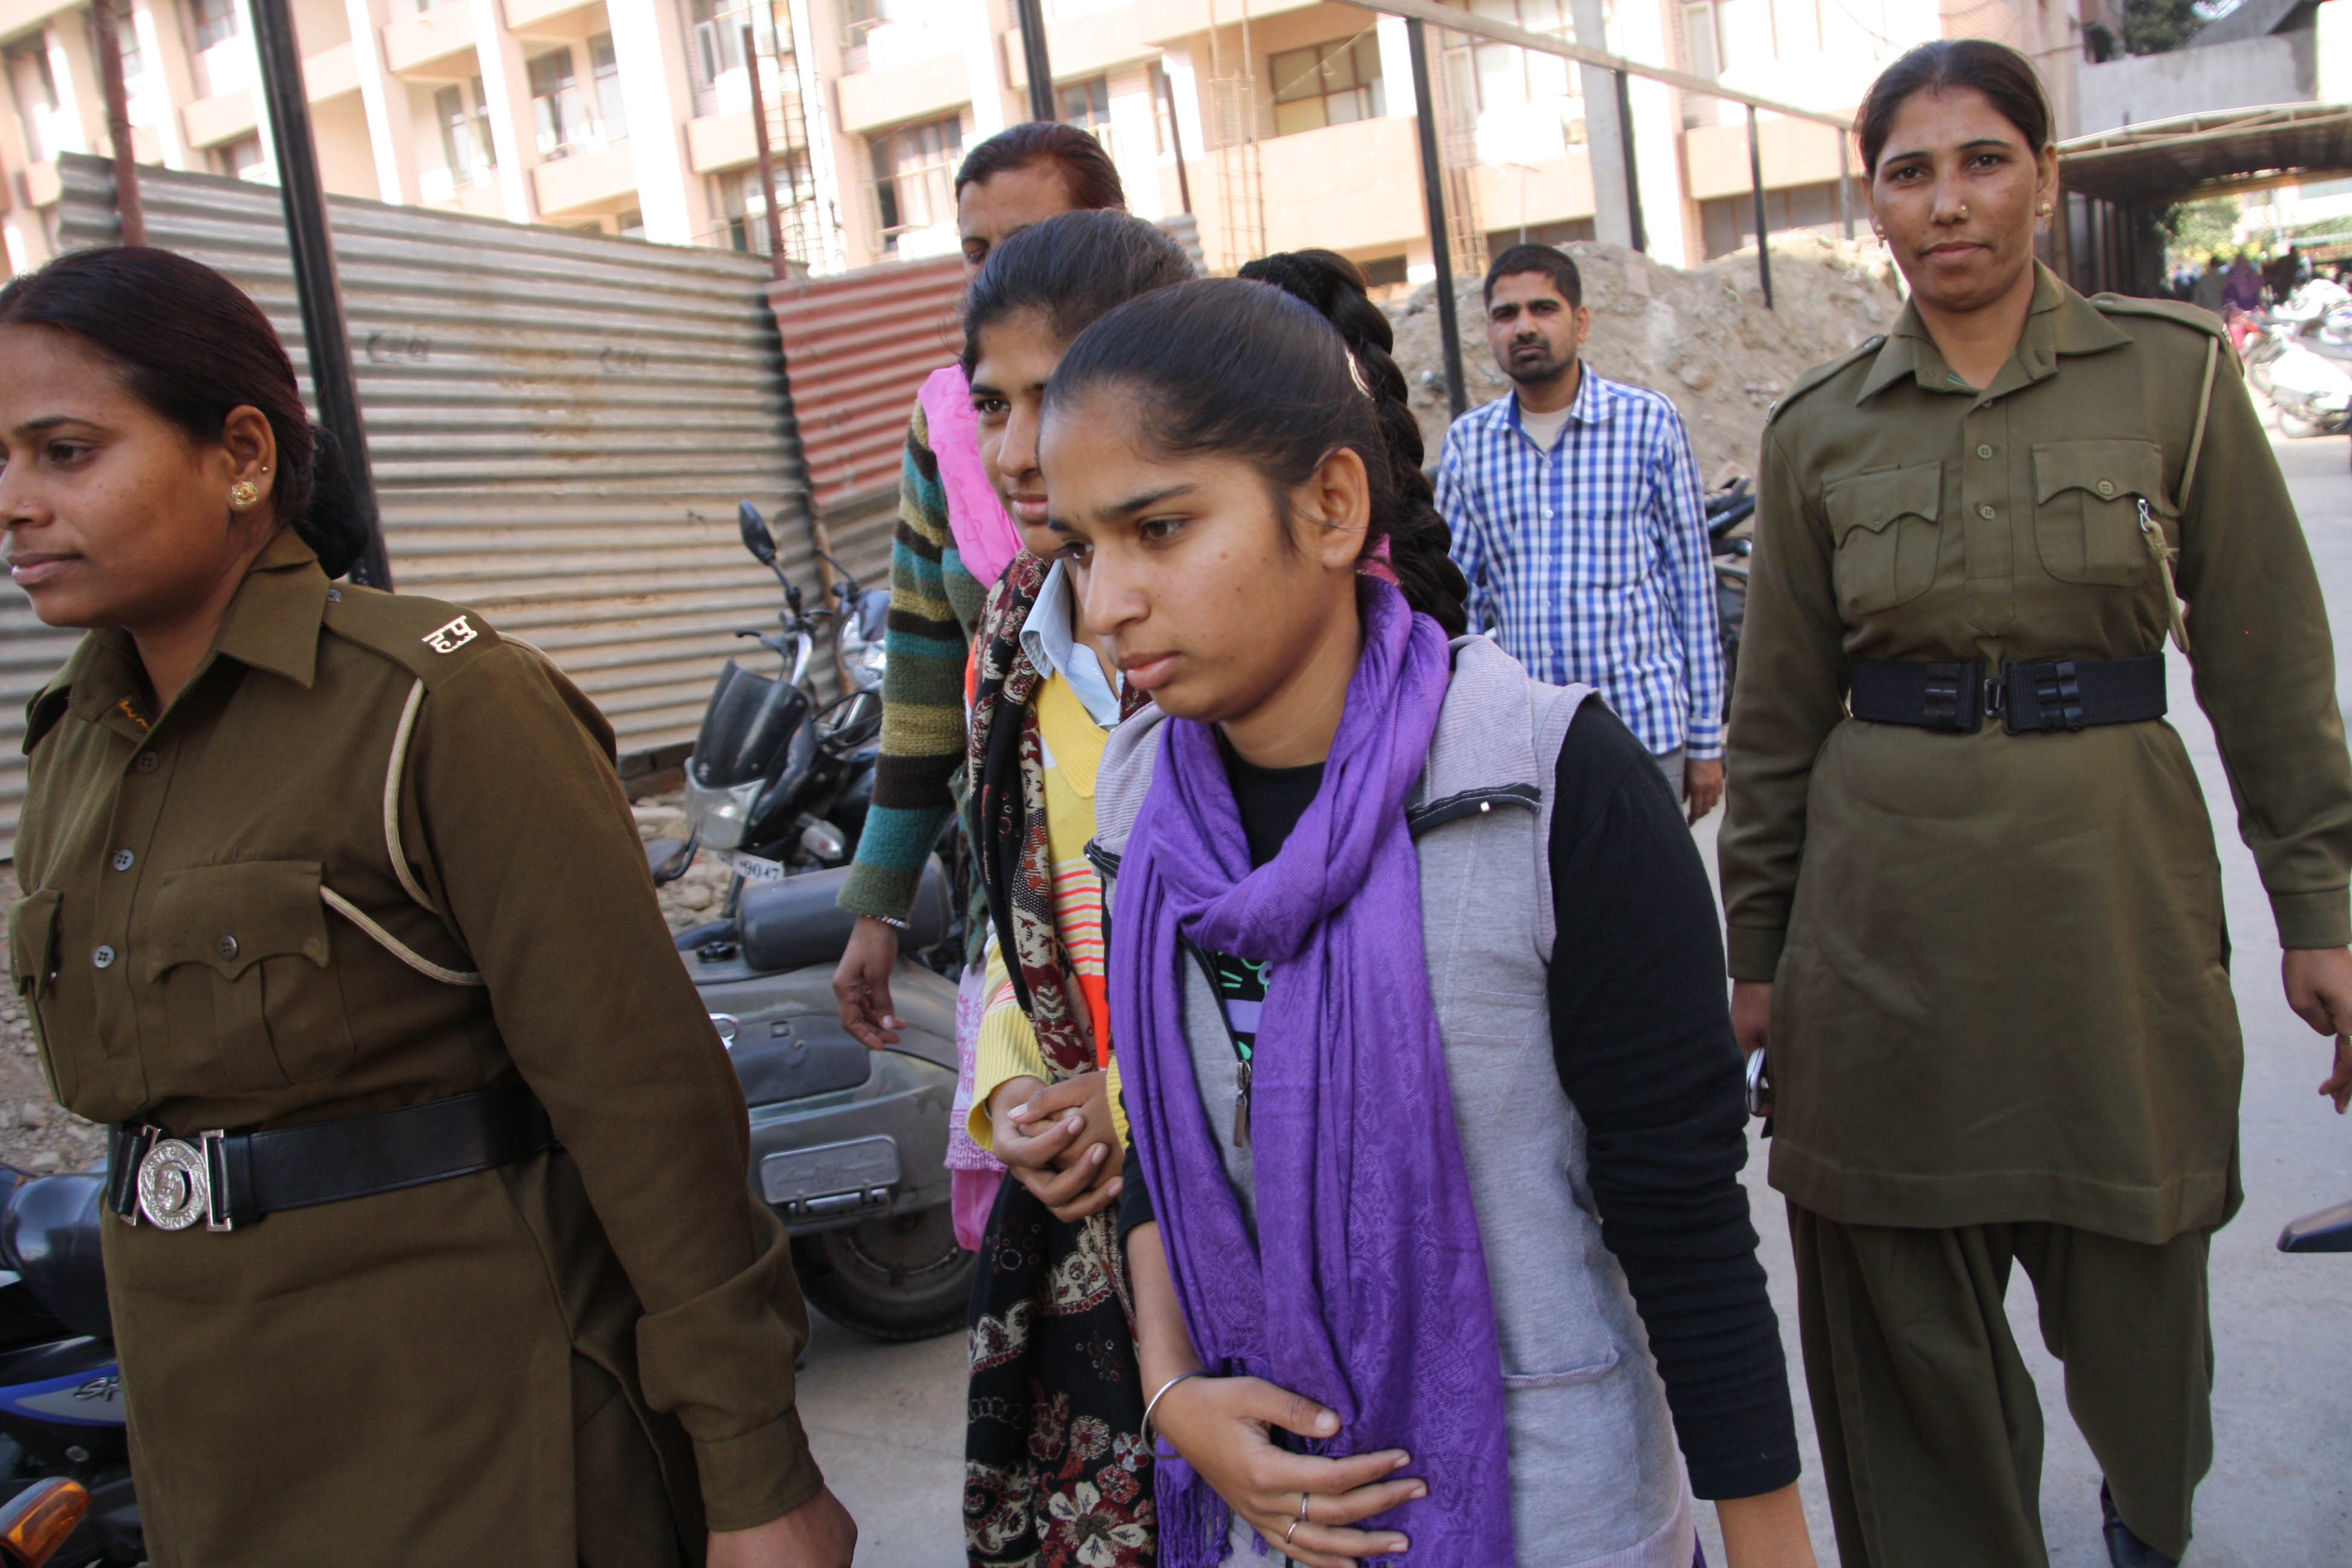 Brave Rohtak Sisters Who Beat Up Their Harassers Fail Lie Detector Test Reports Huffpost India 